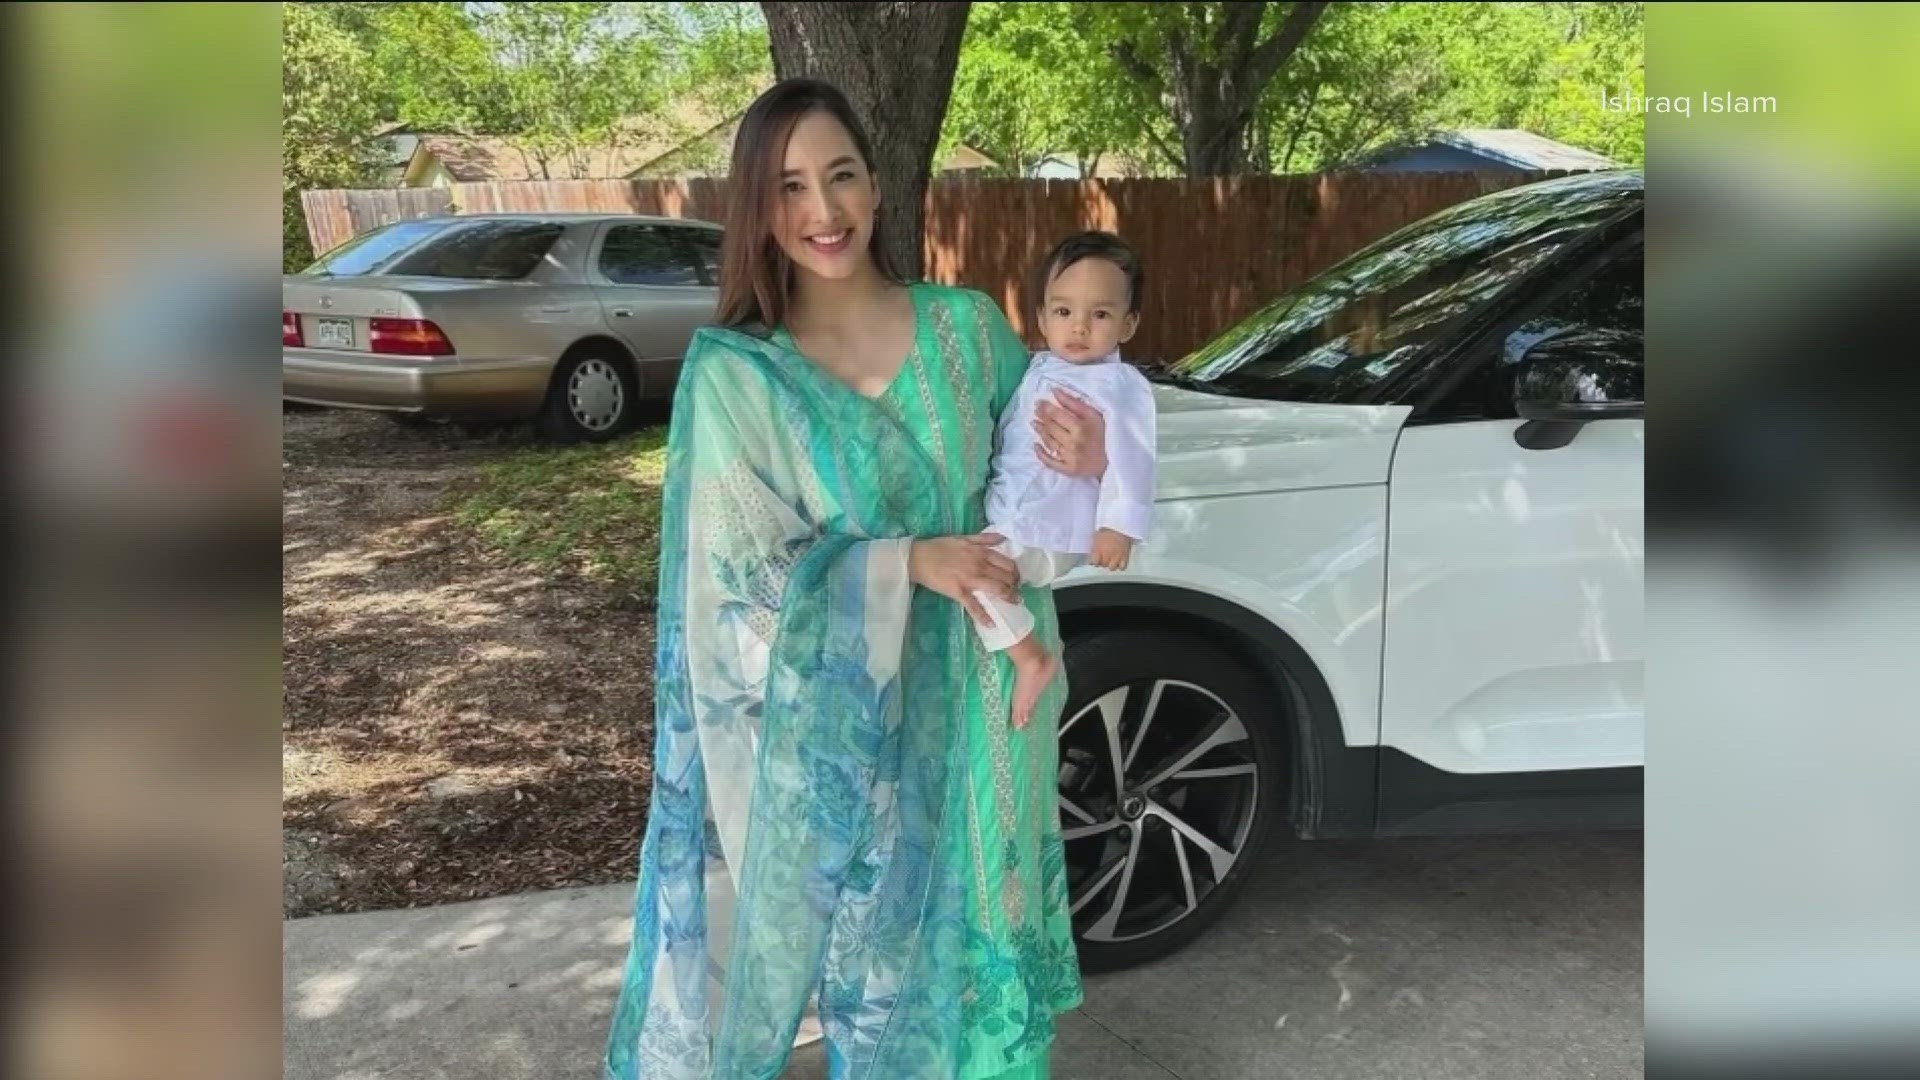 Sabrina Rahman was one of six victims in a shooting spree in San Antonio and Austin. Her grieving husband shared her heroic effort to save their son.